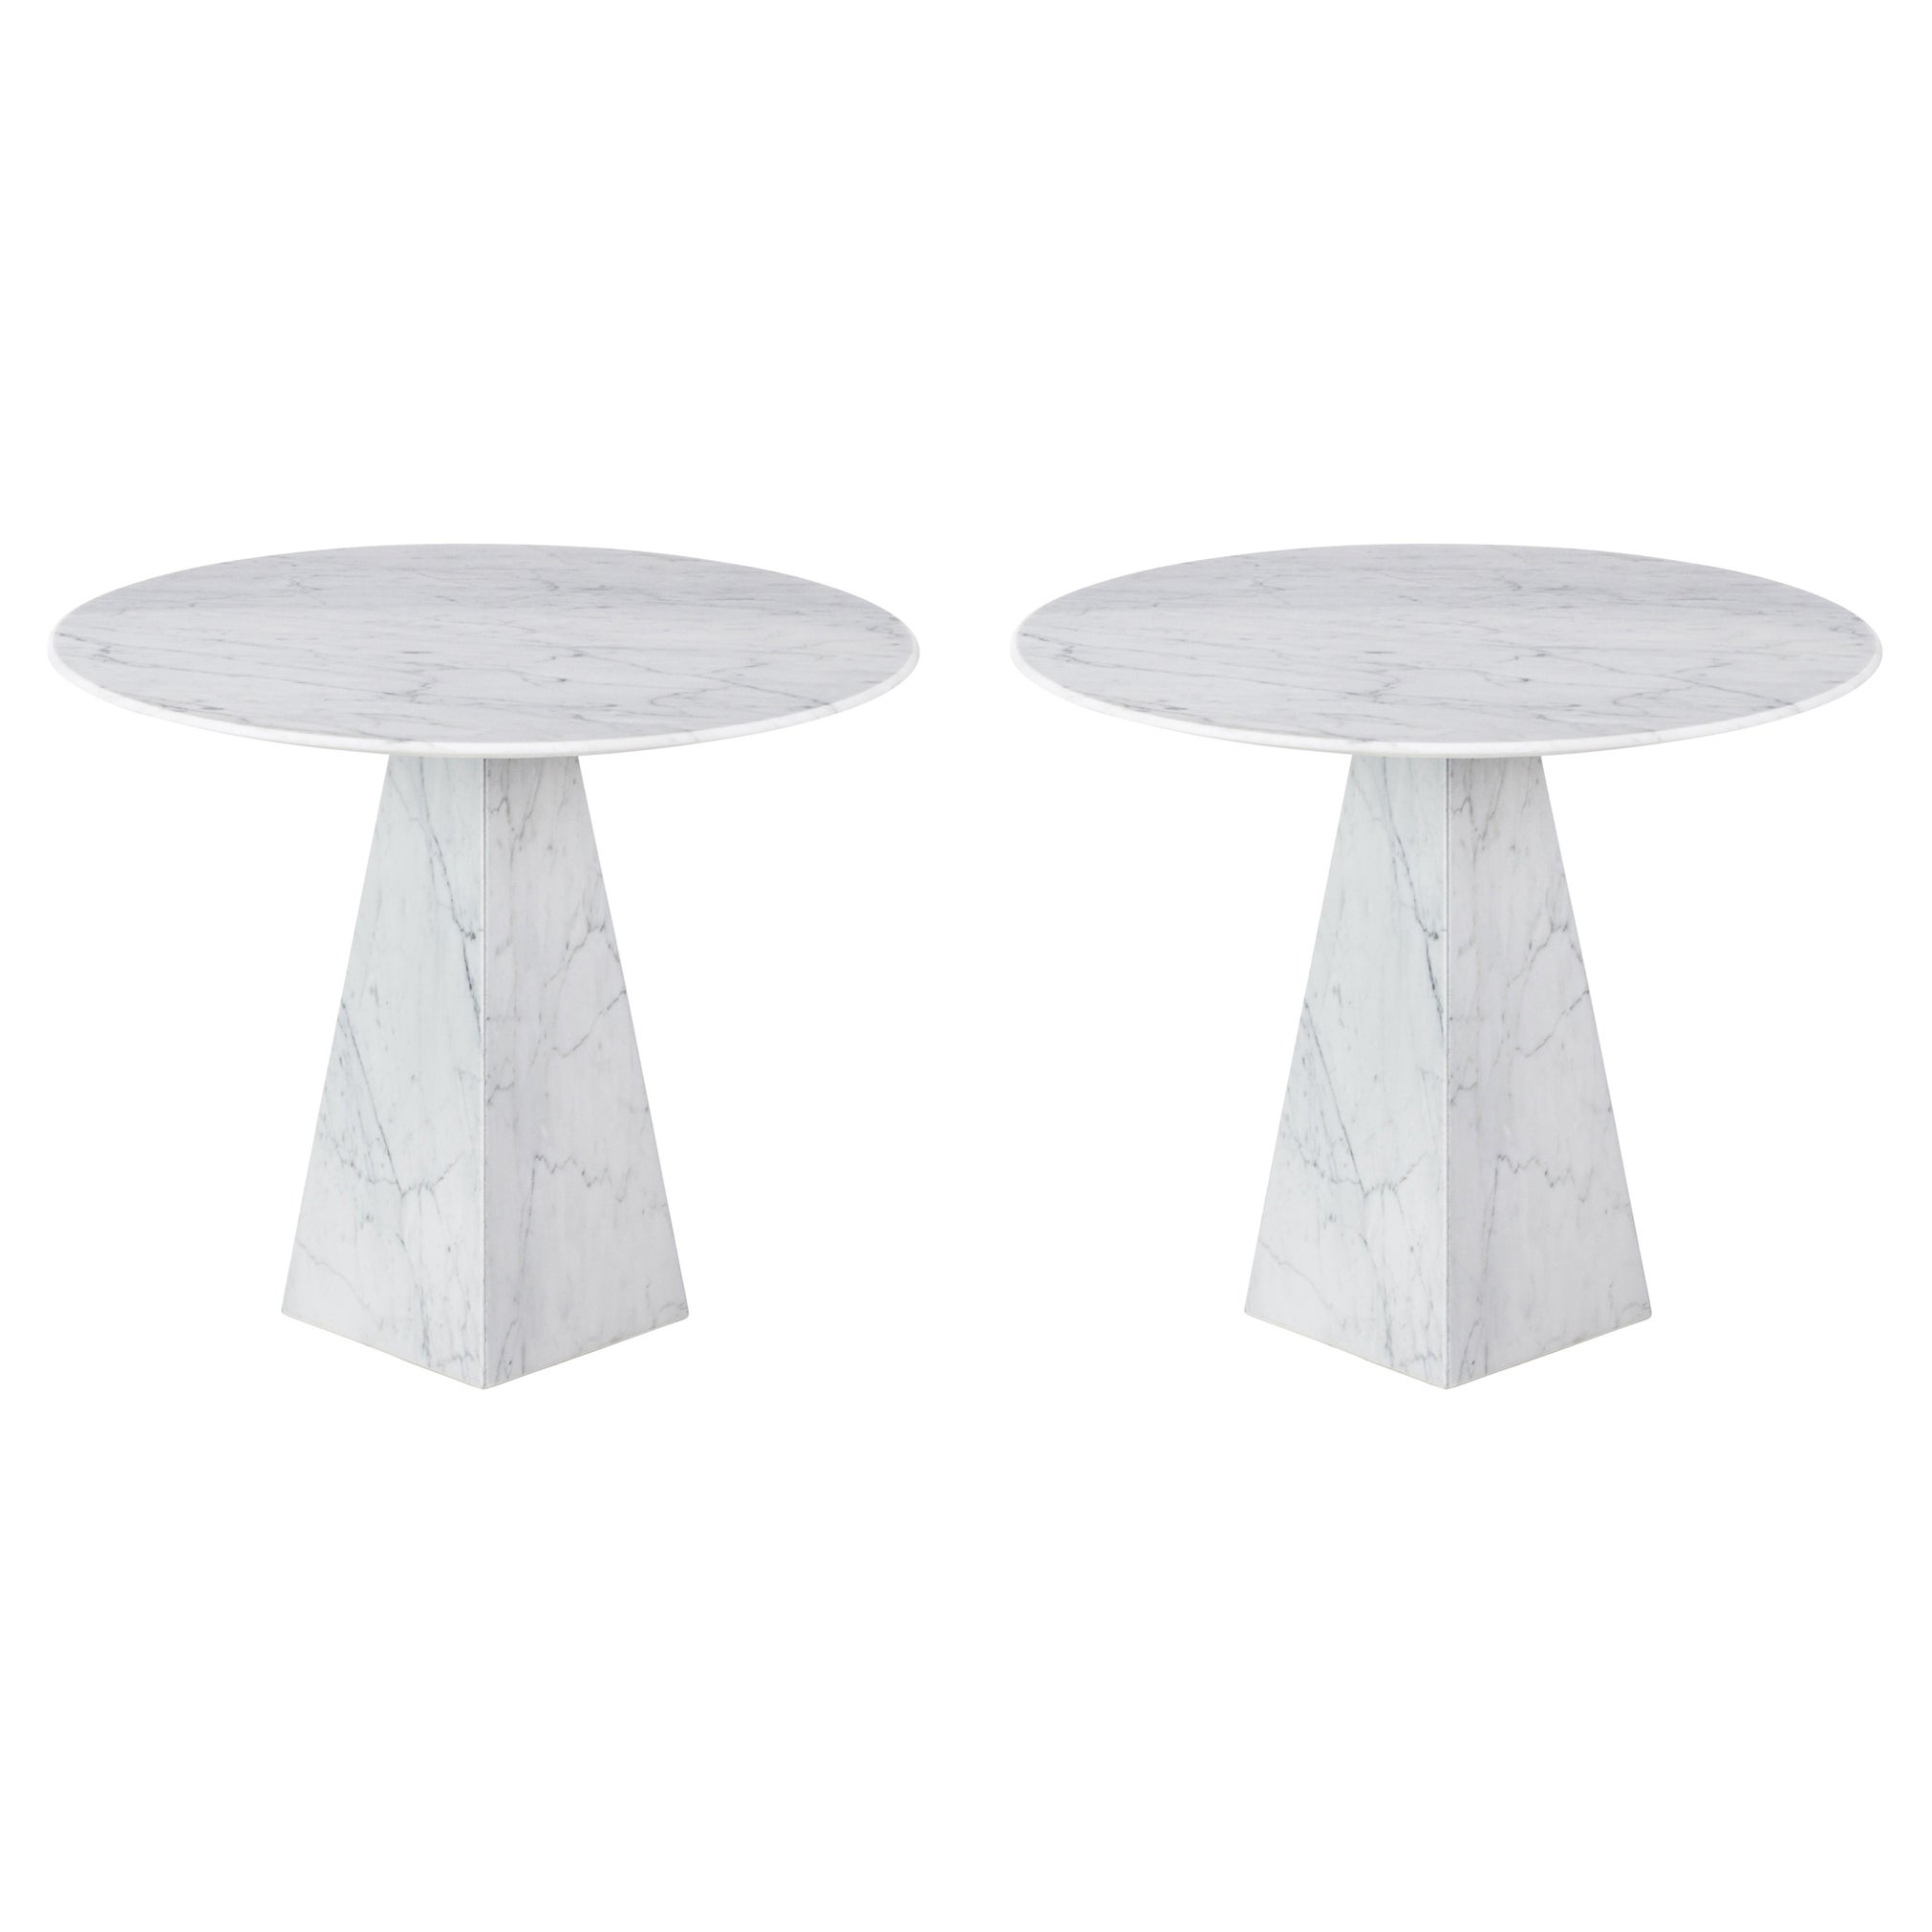 Pair of Ultra Thin White Carrara Marble Round Sidetables For Sale